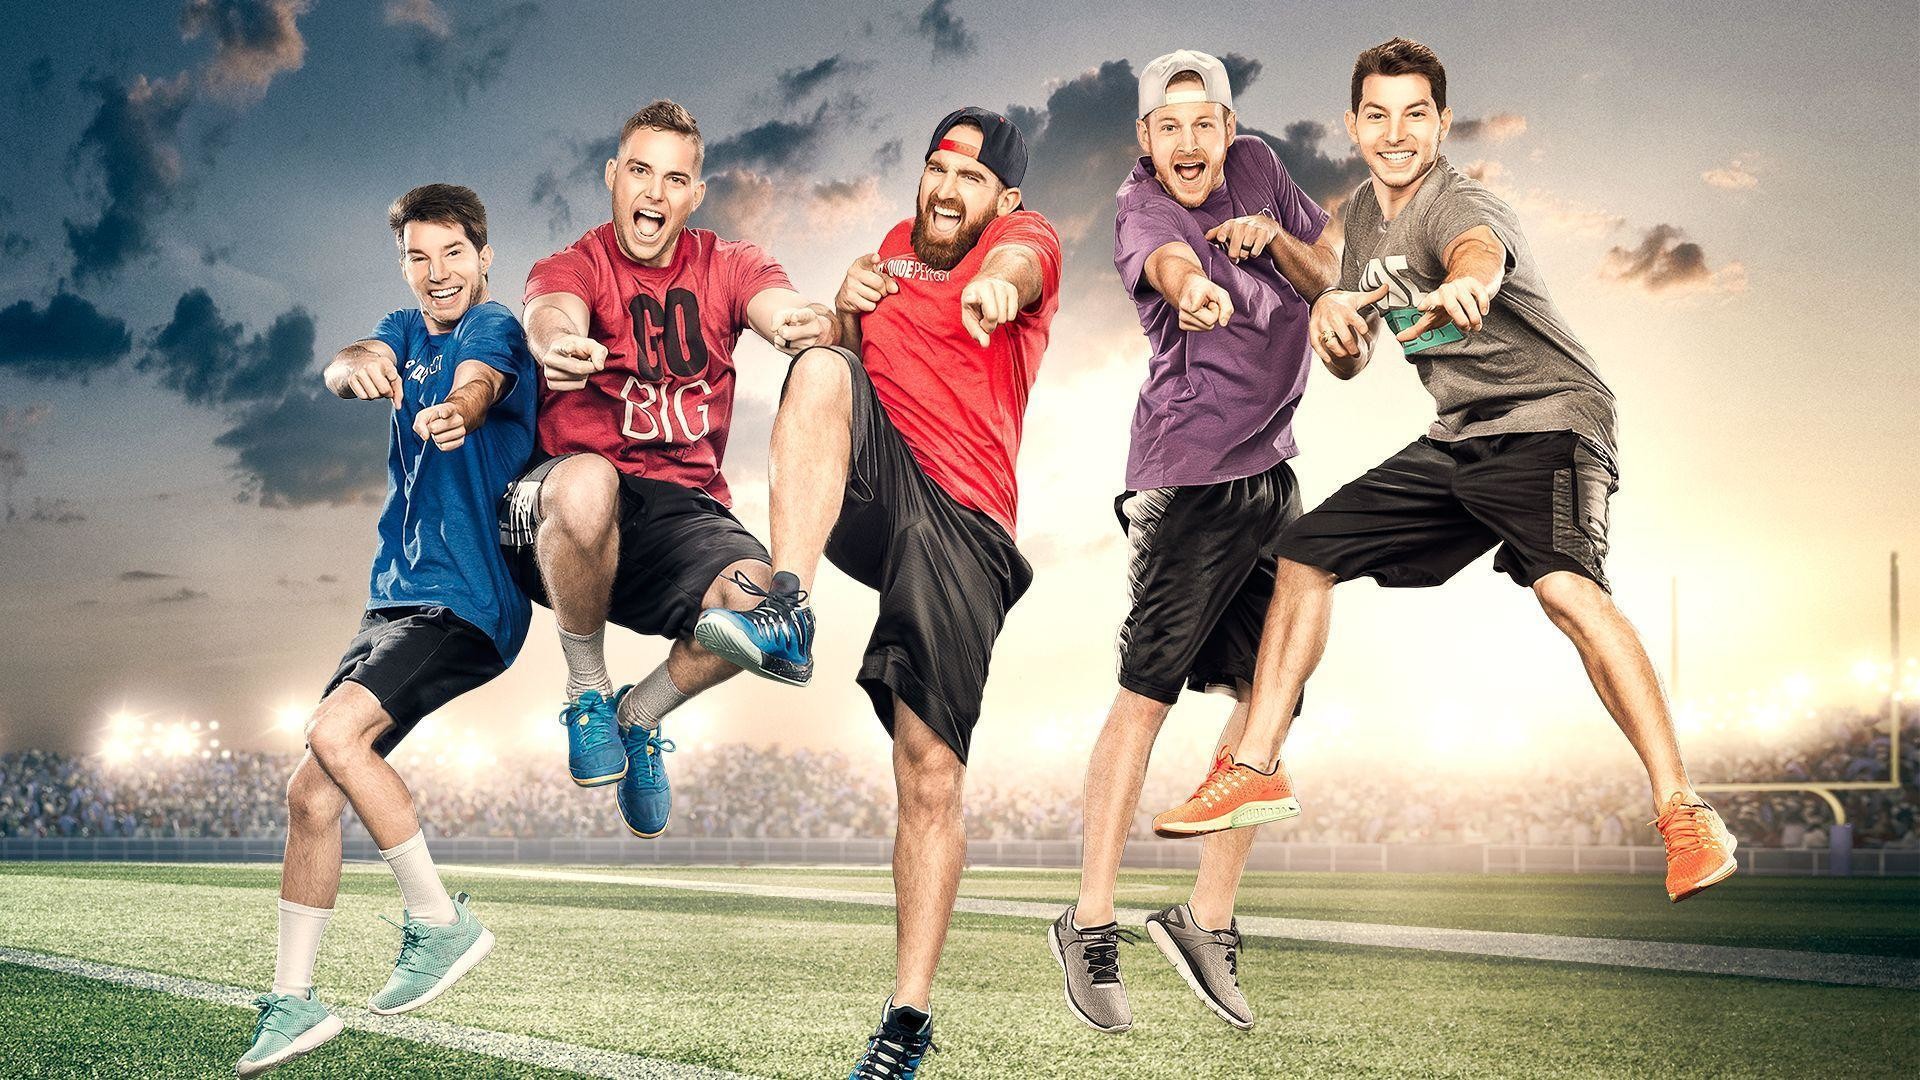 1920x1080 Dude Perfect - ClipartFest | Dude Perfect, Dude Perfect Store, and .